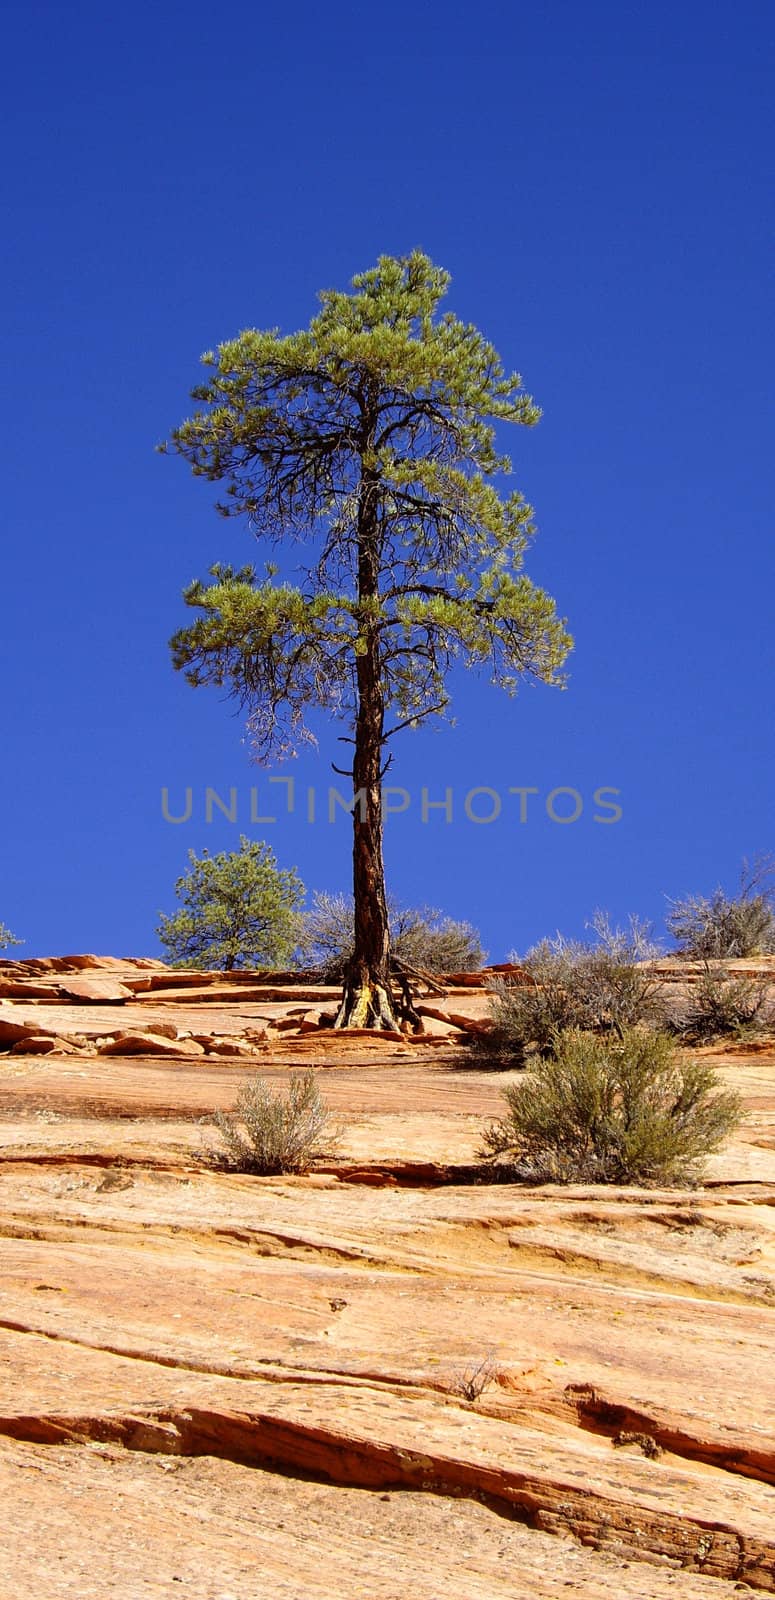 Tree stands alone on sandstone cliff Zion